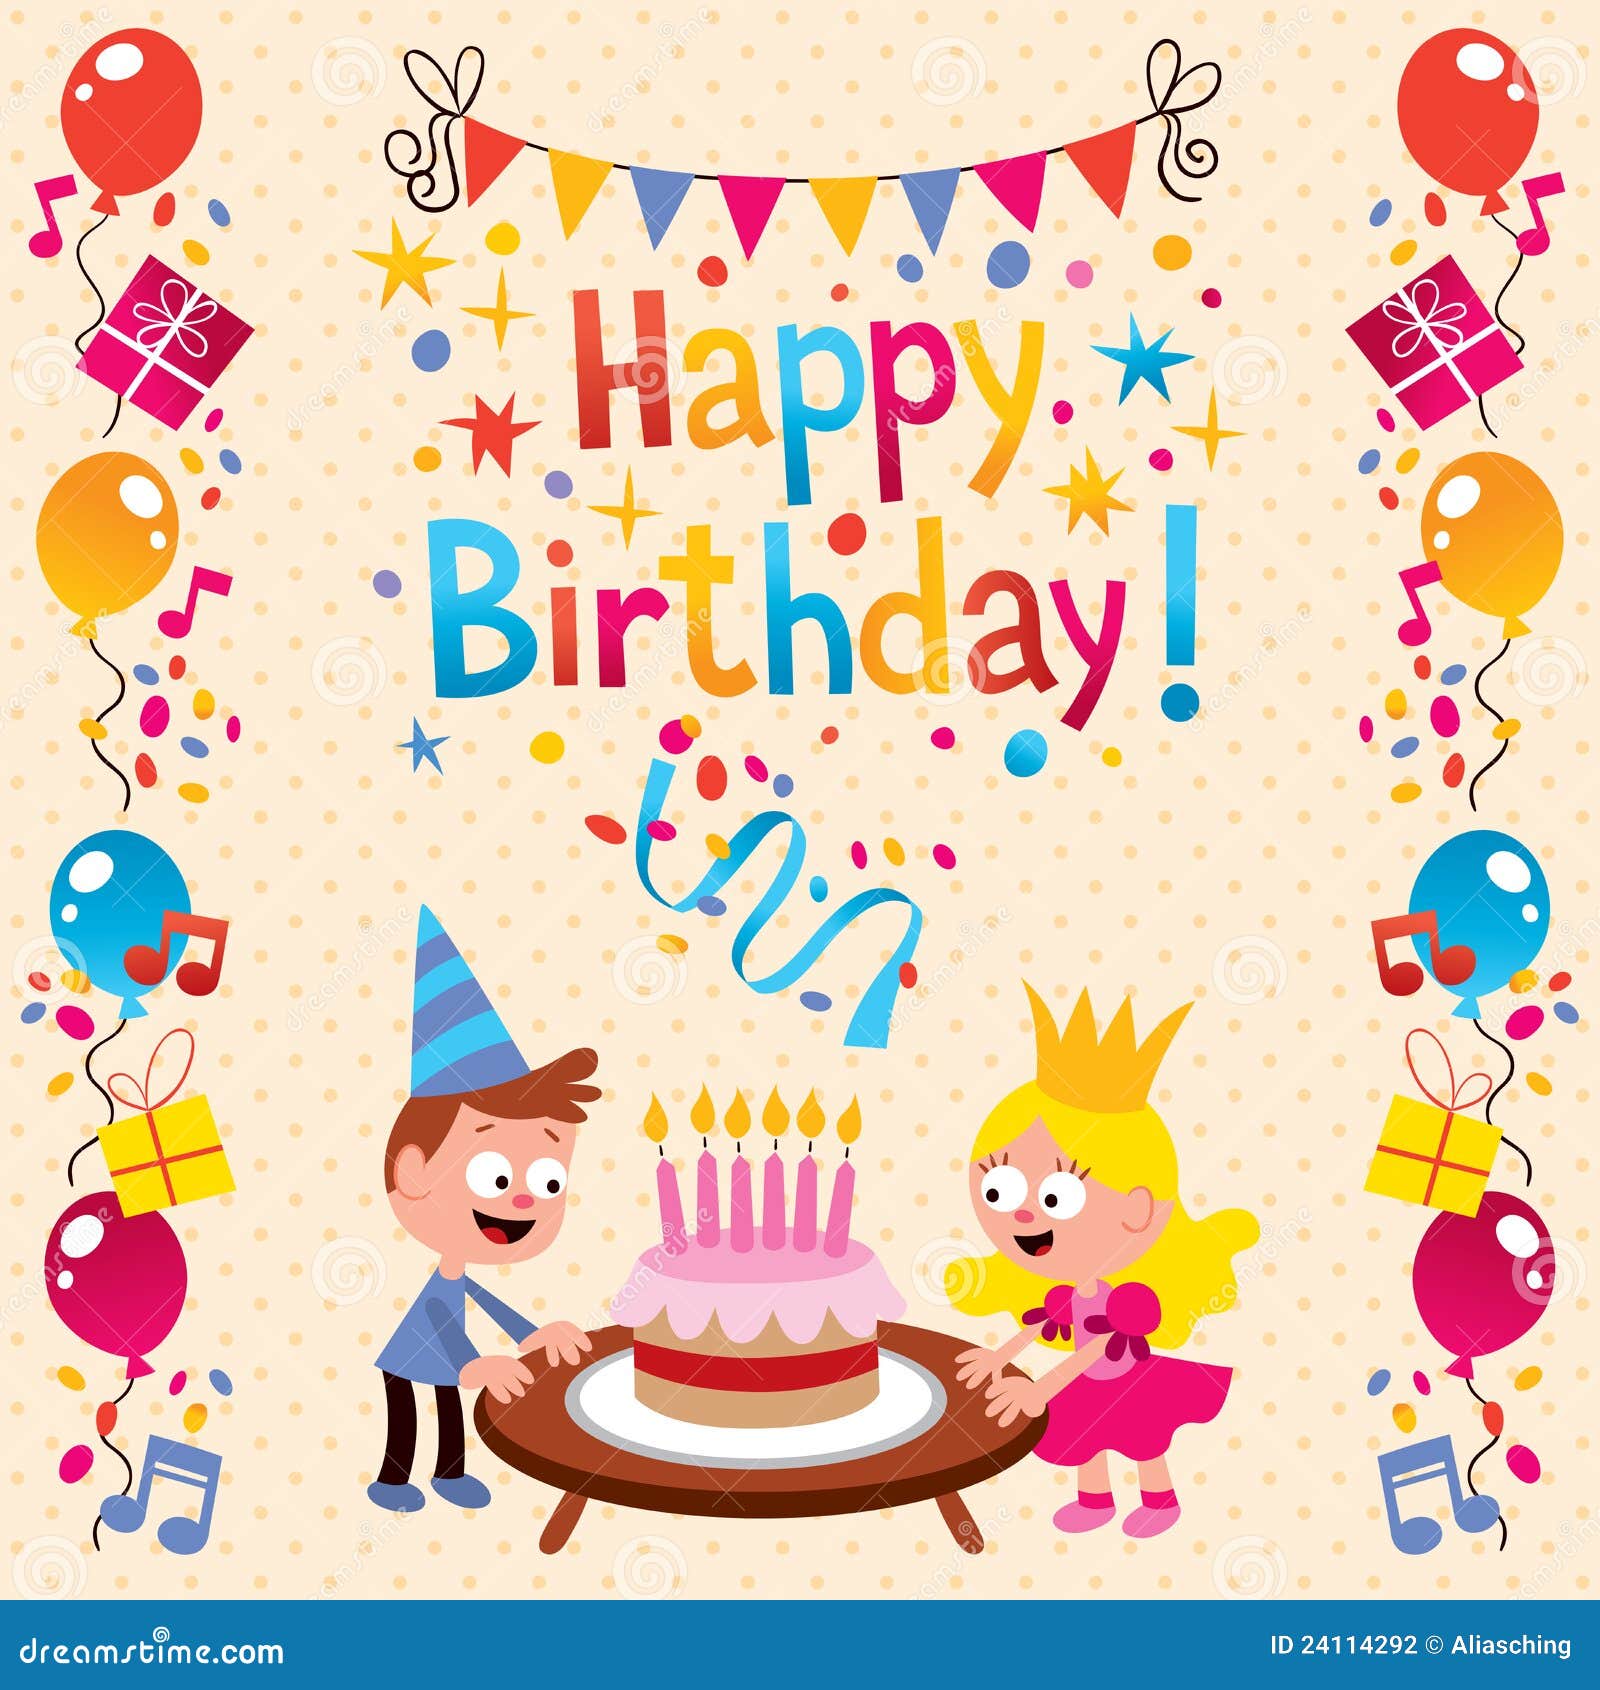 Happy Birthday card stock vector. Illustration of party - 24114292